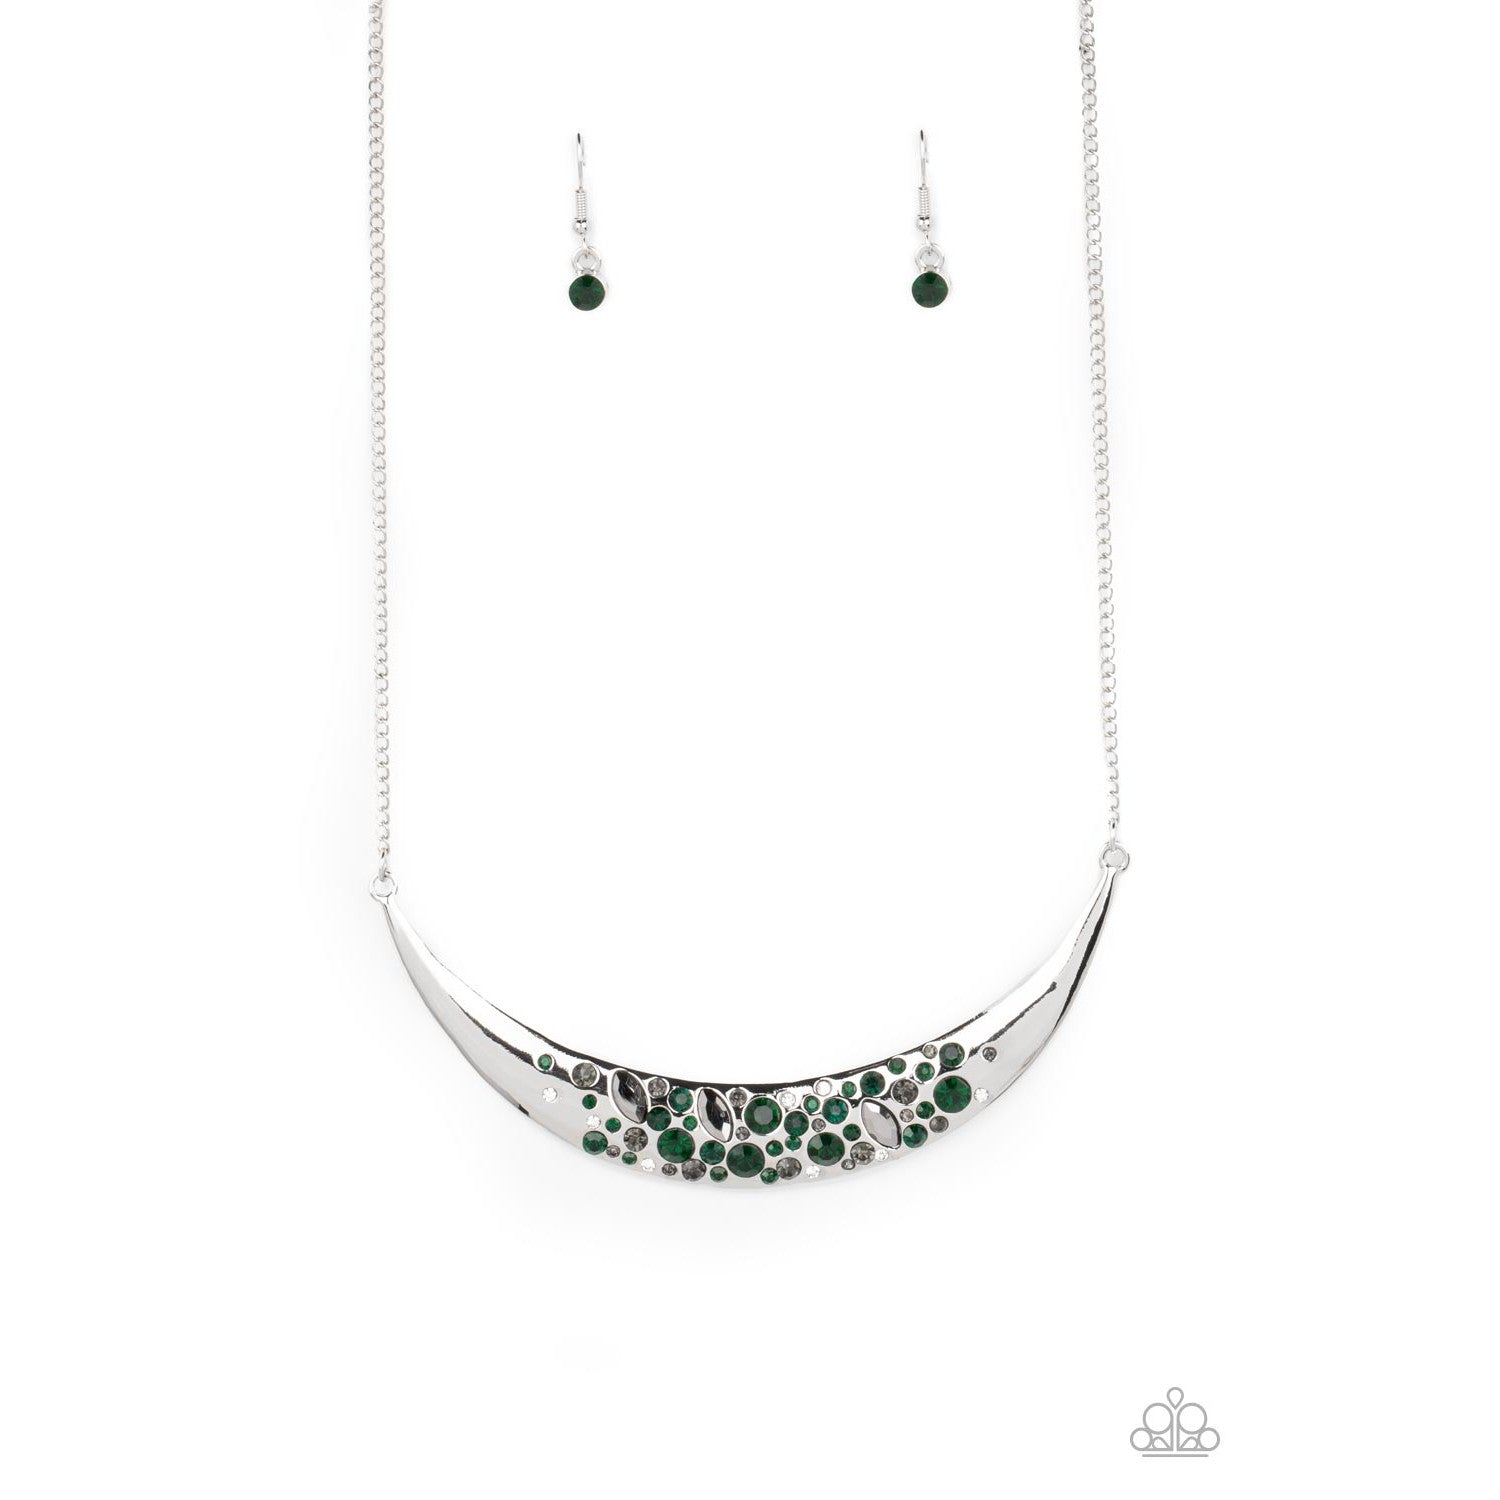 Bejeweled Baroness - Green Necklace - Bling by Danielle Baker